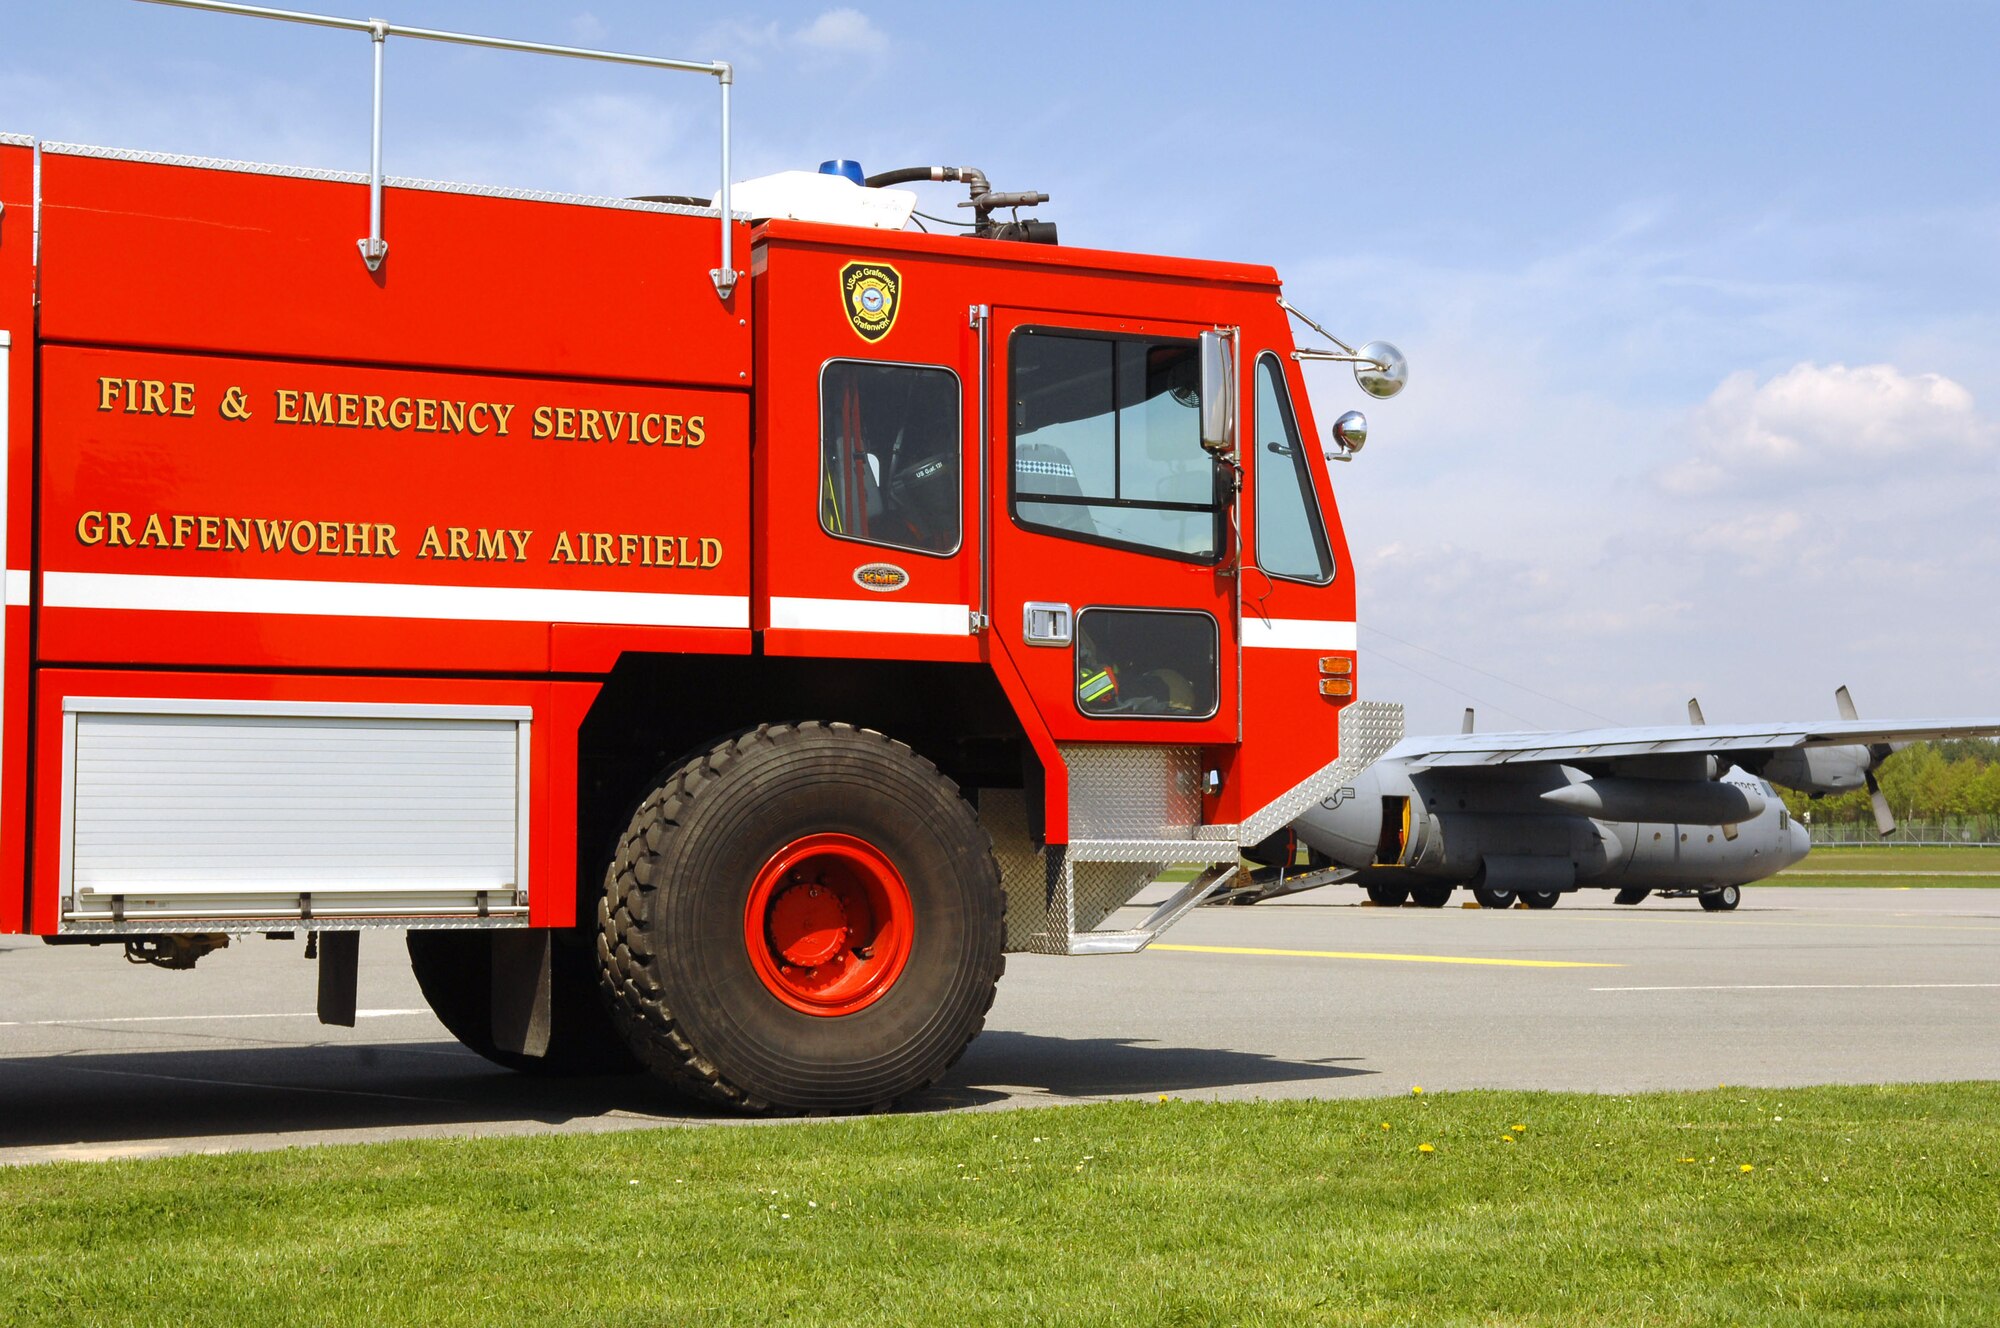 A fire truck from Grafenwoehr Army Airfield, Germany, stands-by as a C-130E from the 86th Airlift Wing prepares to fly members from the 173rd Airborne Brigade Combat Team to complete their quarterly training jump, April 22, 2009. The 173rd ABCT relies solely on the support of the 86th Airlift Wing to maintain their quarterly proficiency jump requirements. (U.S. Air Force photo by Tech. Sgt. Michael Voss)